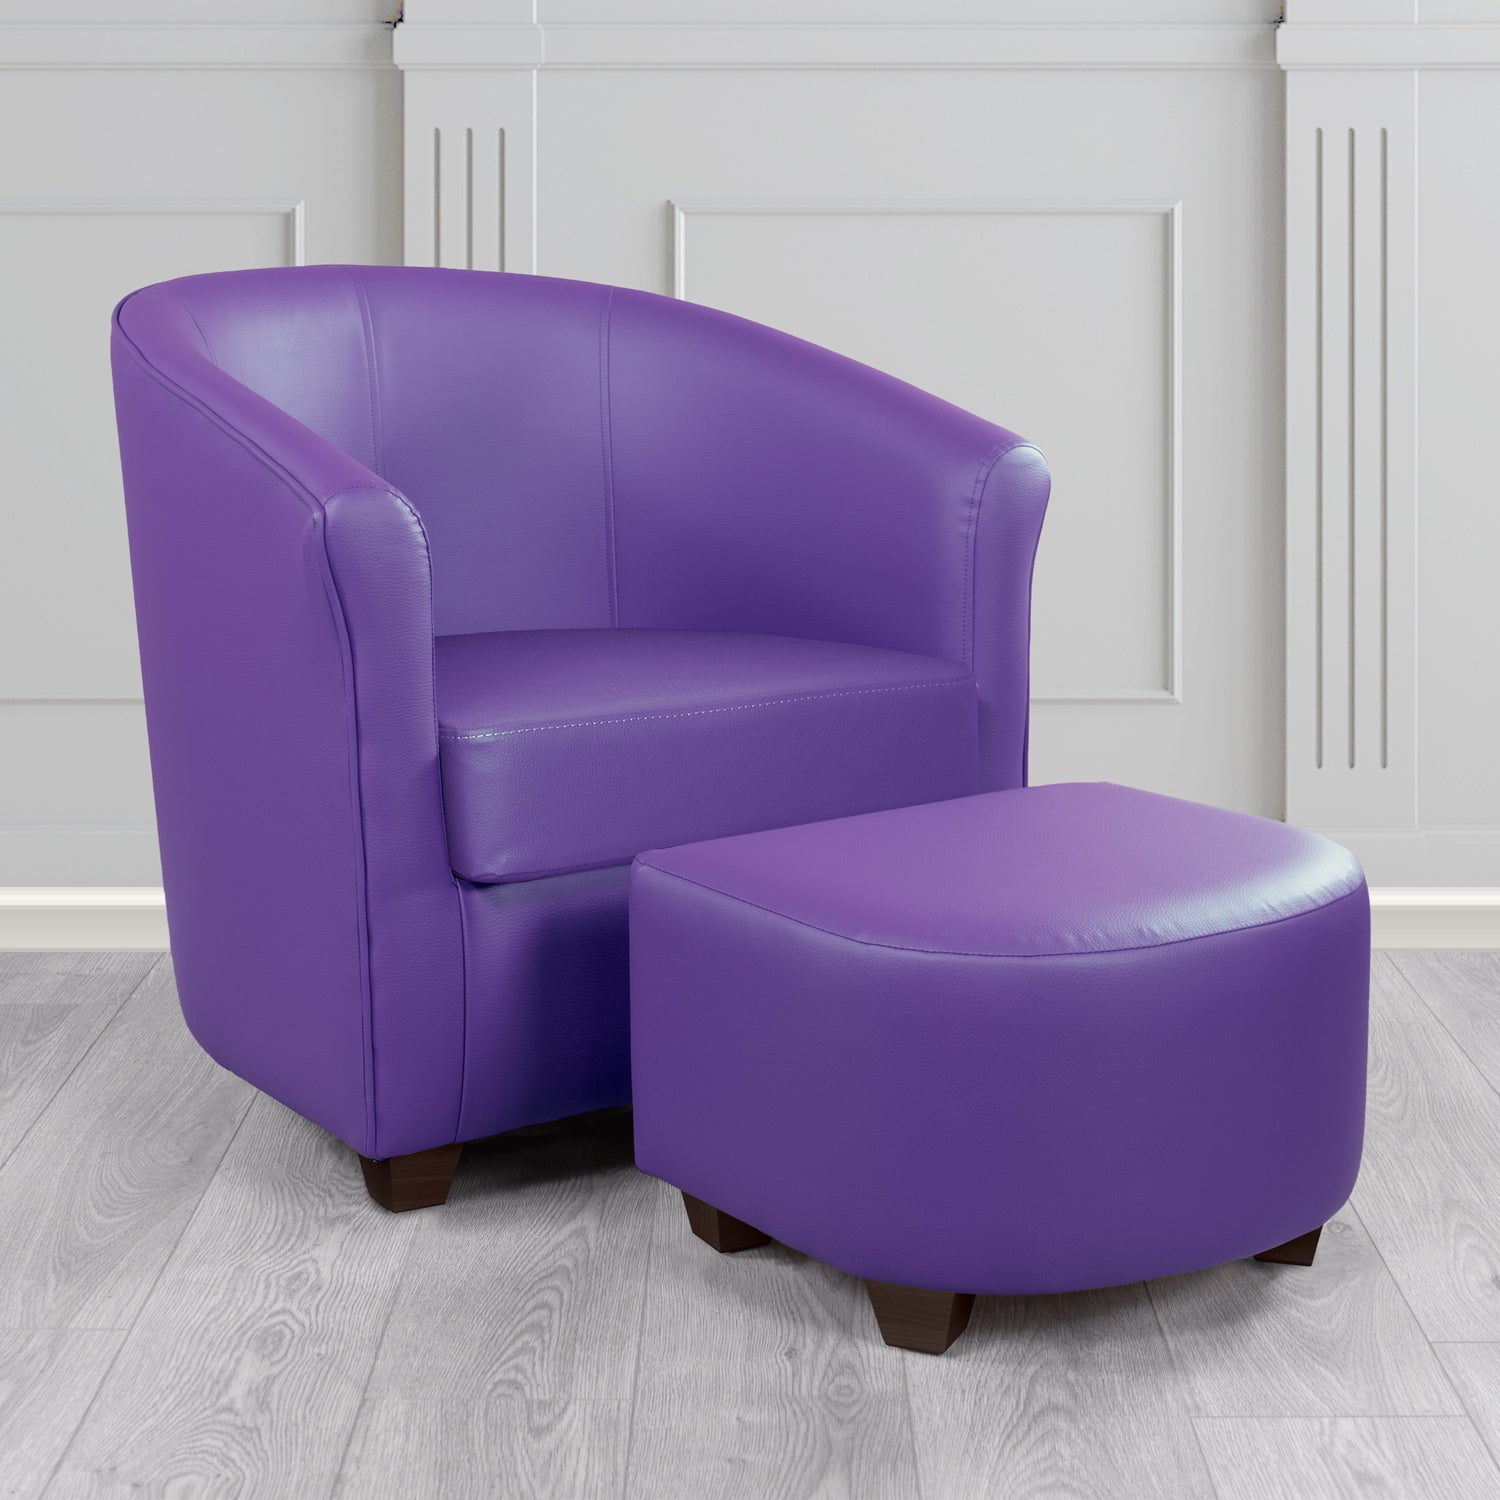 Cannes Tub Chair with Footstool Set in Just Colour Ultraviolet Crib 5 Faux Leather